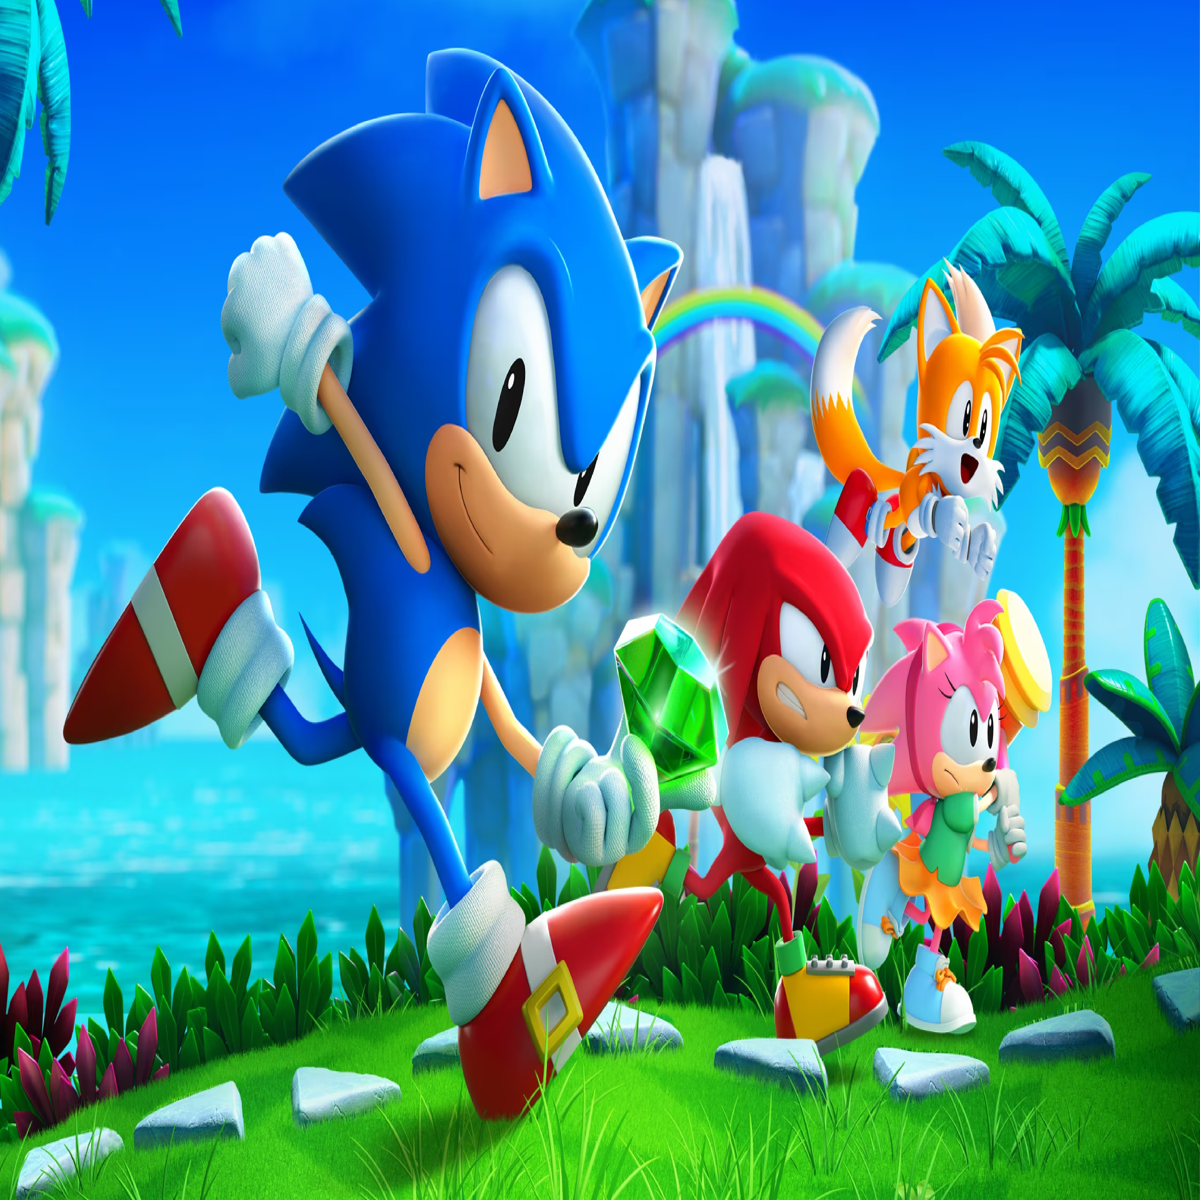 But you're still standing here — SEGA and its most recent Sonamy